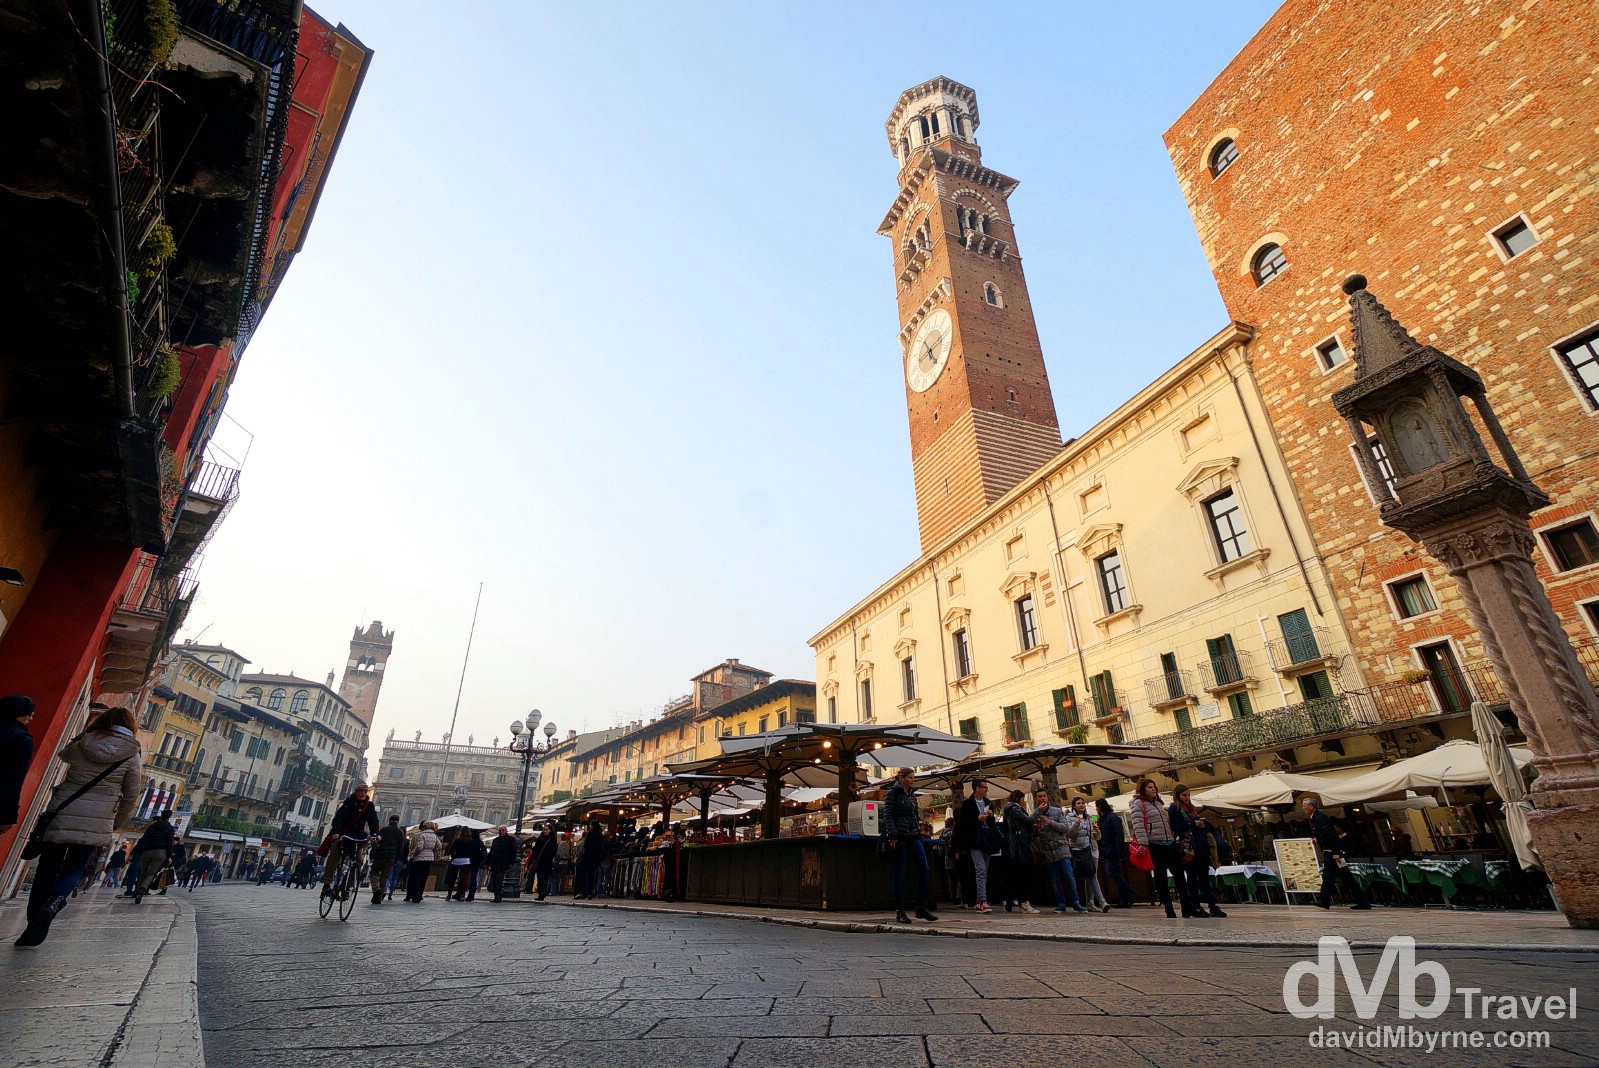 Piazza Delle Erbe, originally the site of a Roman forum and now the lively heart of Verona & lined by some of its most sumptuous buildings. Verona, Veneto, northern Italy. March 17th, 2014 (NEX-5r || SEL 10-20mm || 10mm, 1/100sec, f/7.1, iso100)